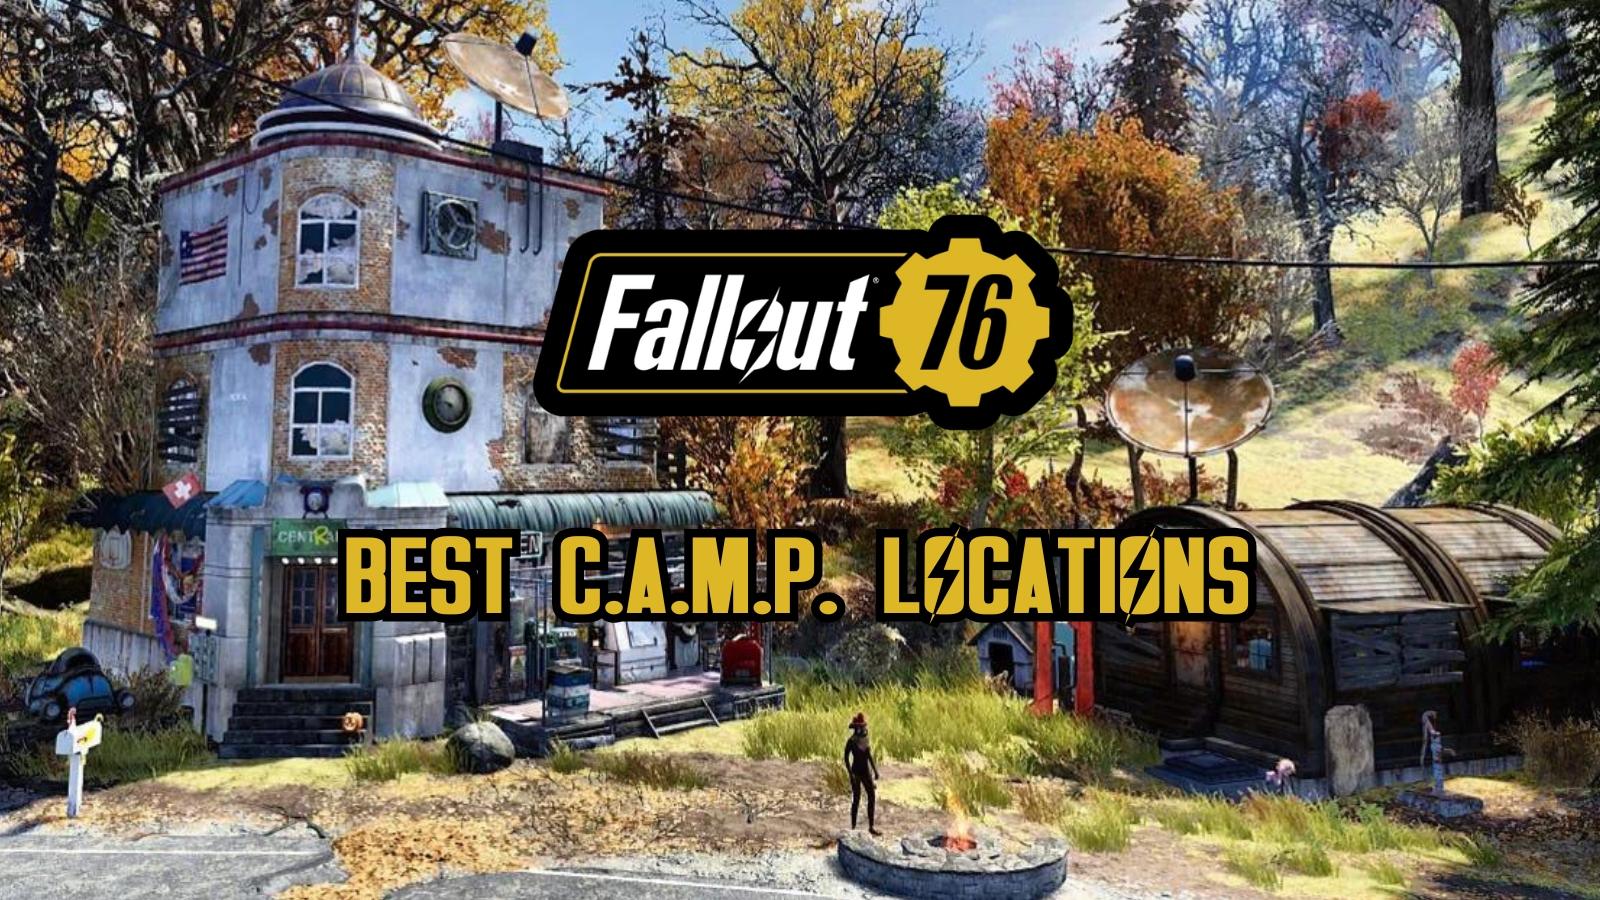 Fallout 76 best camps cover